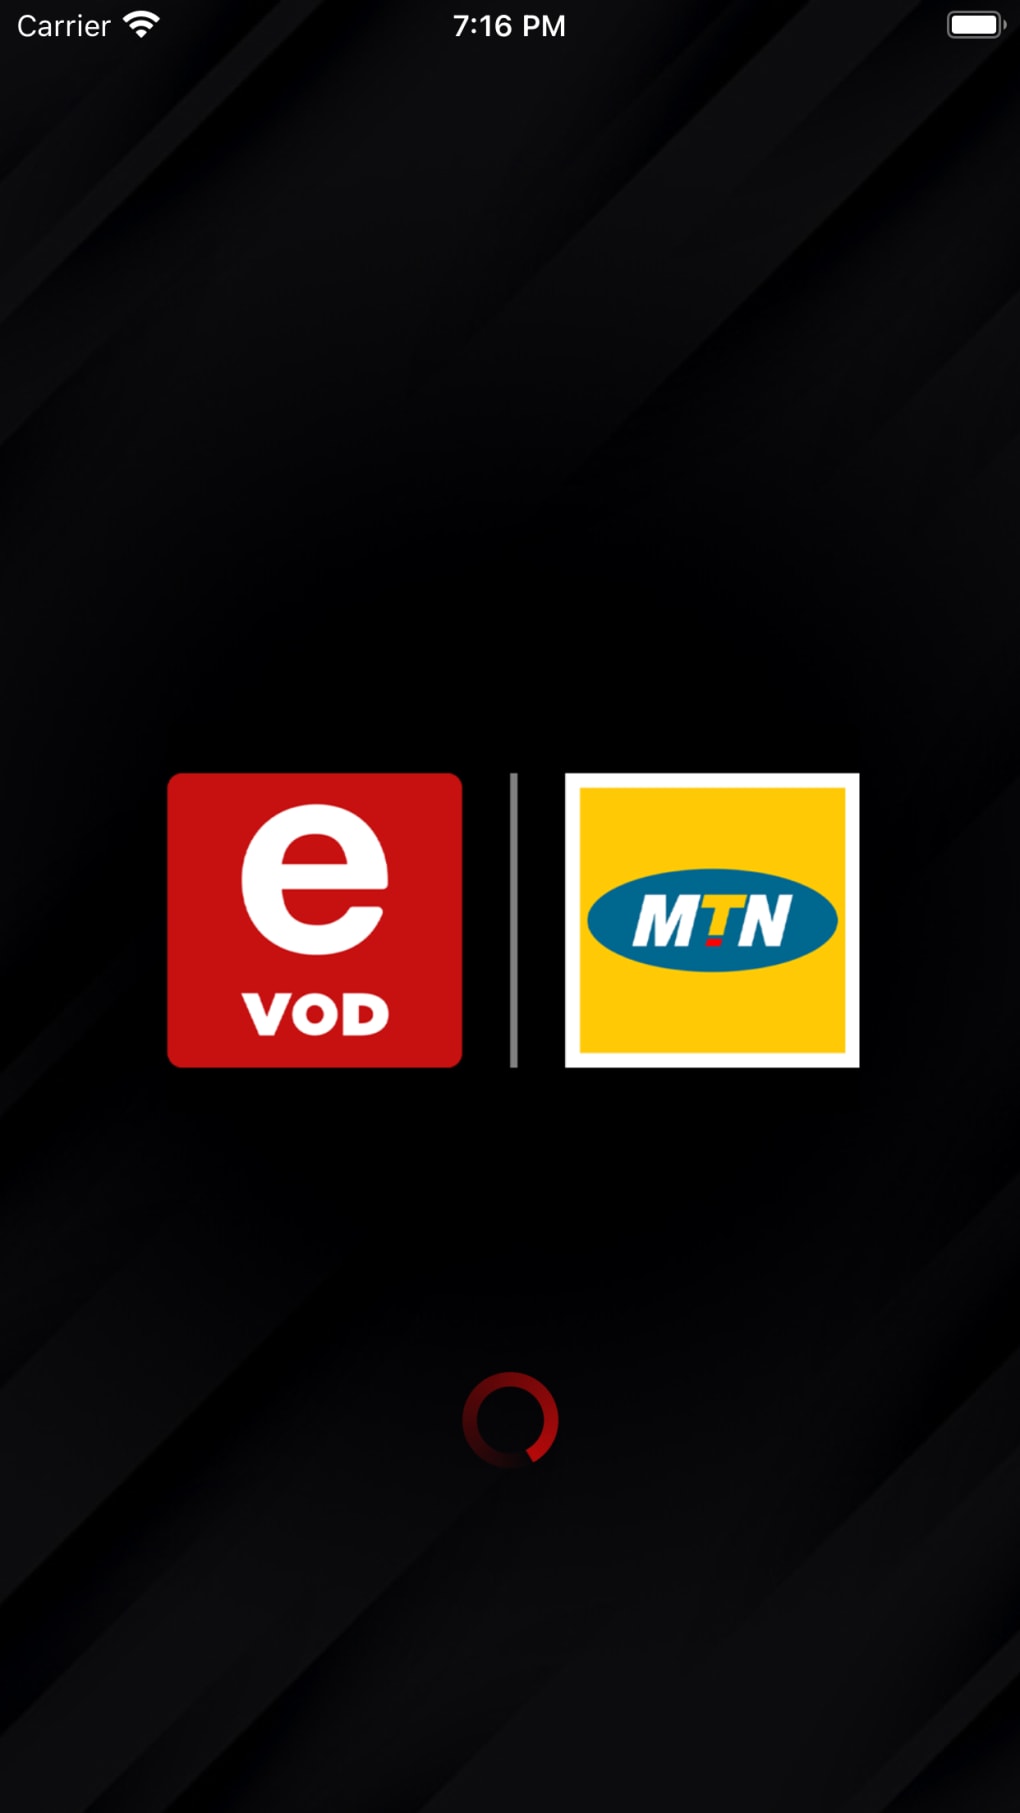 eVOD - eTV for iPhone